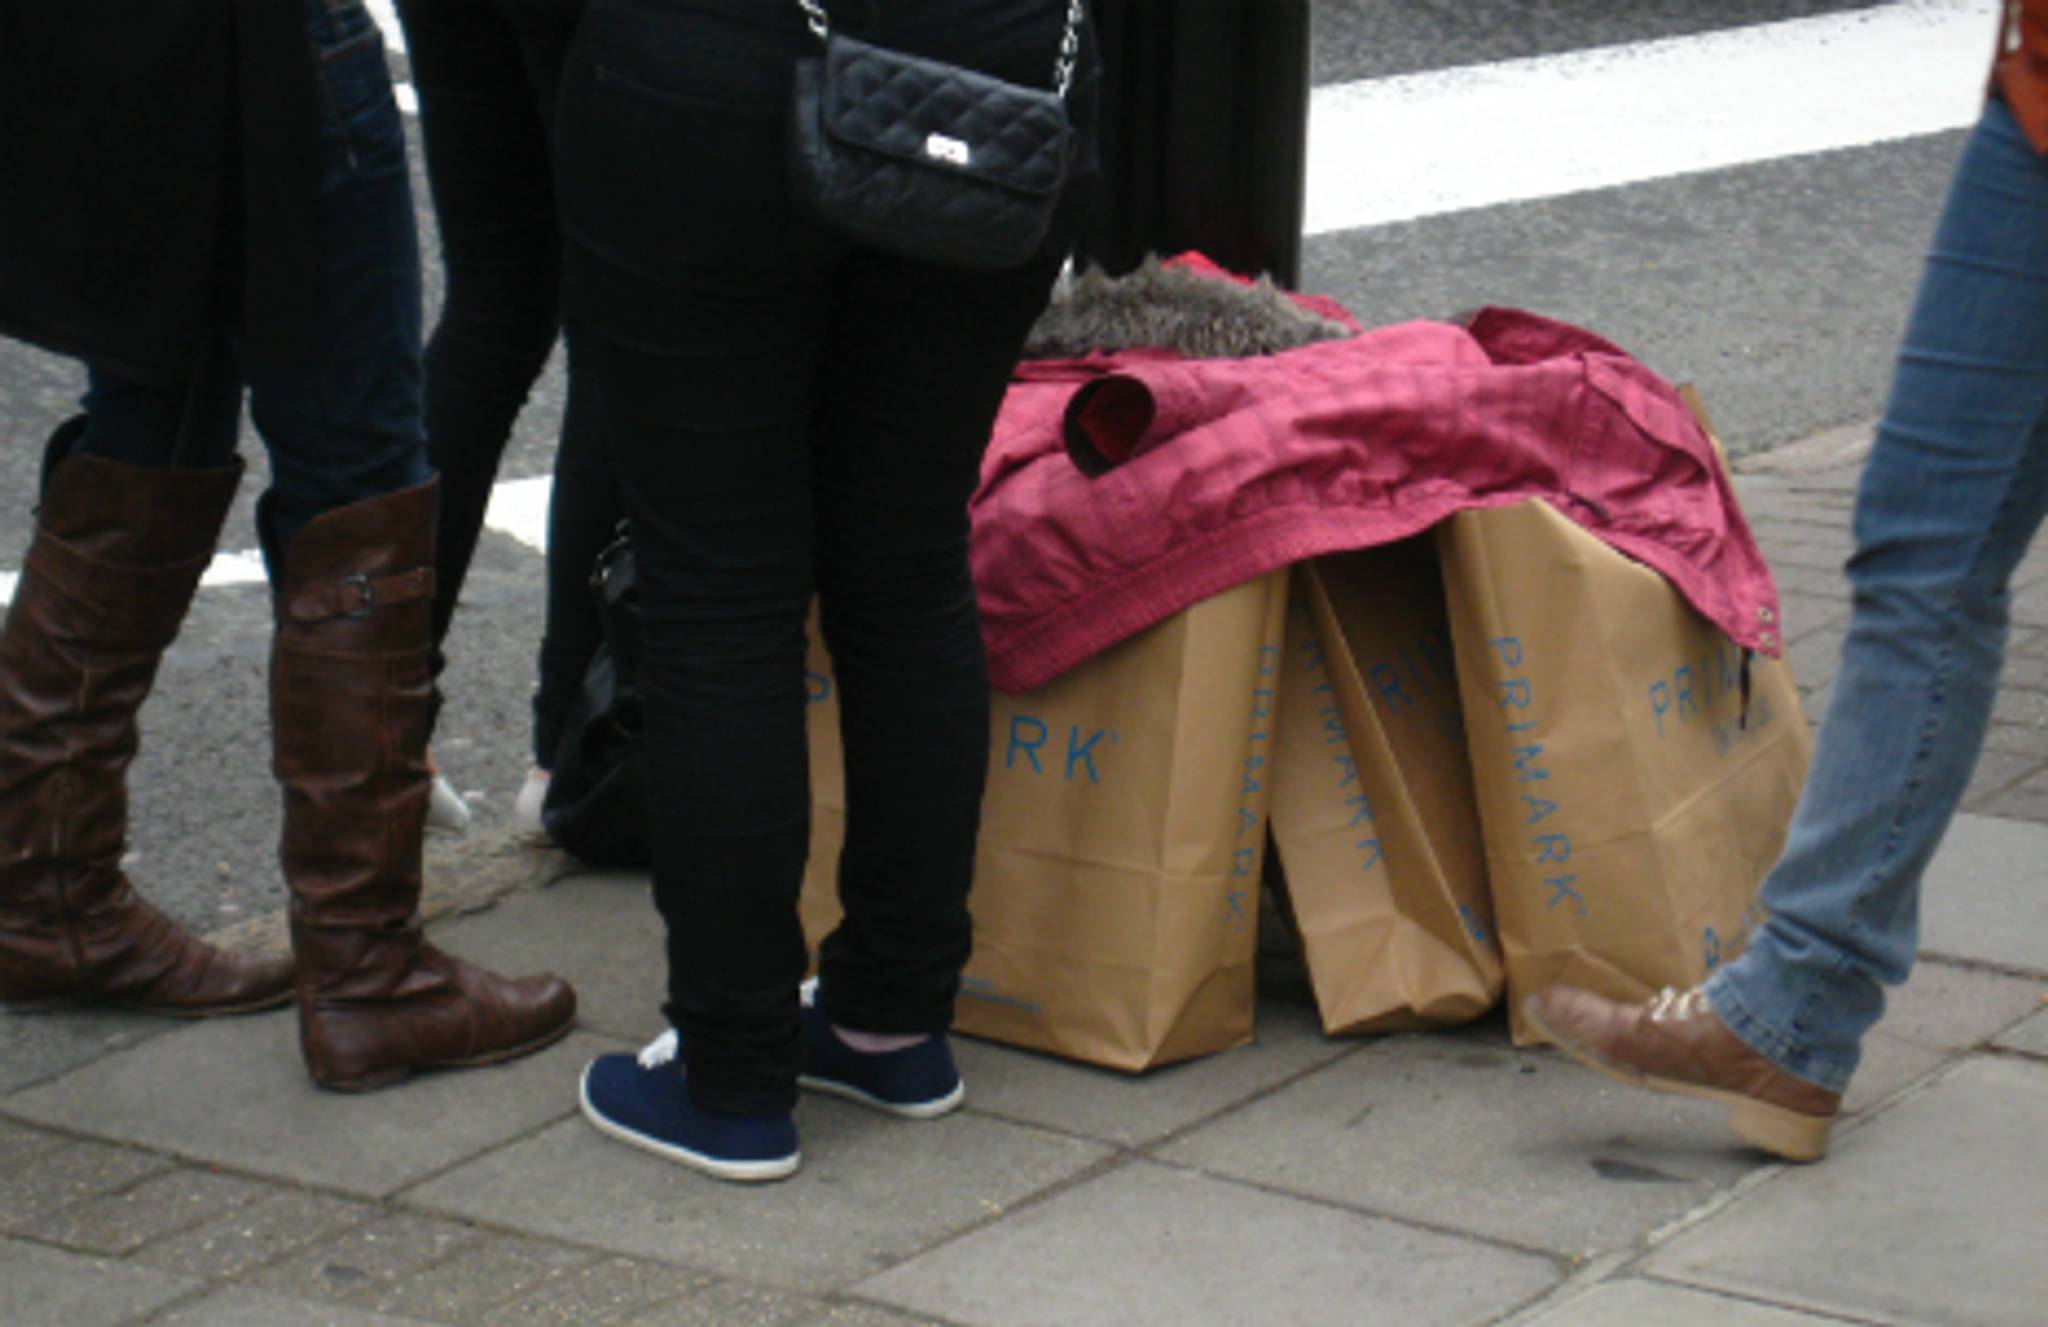 Why poor people don’t want to shop at Primark